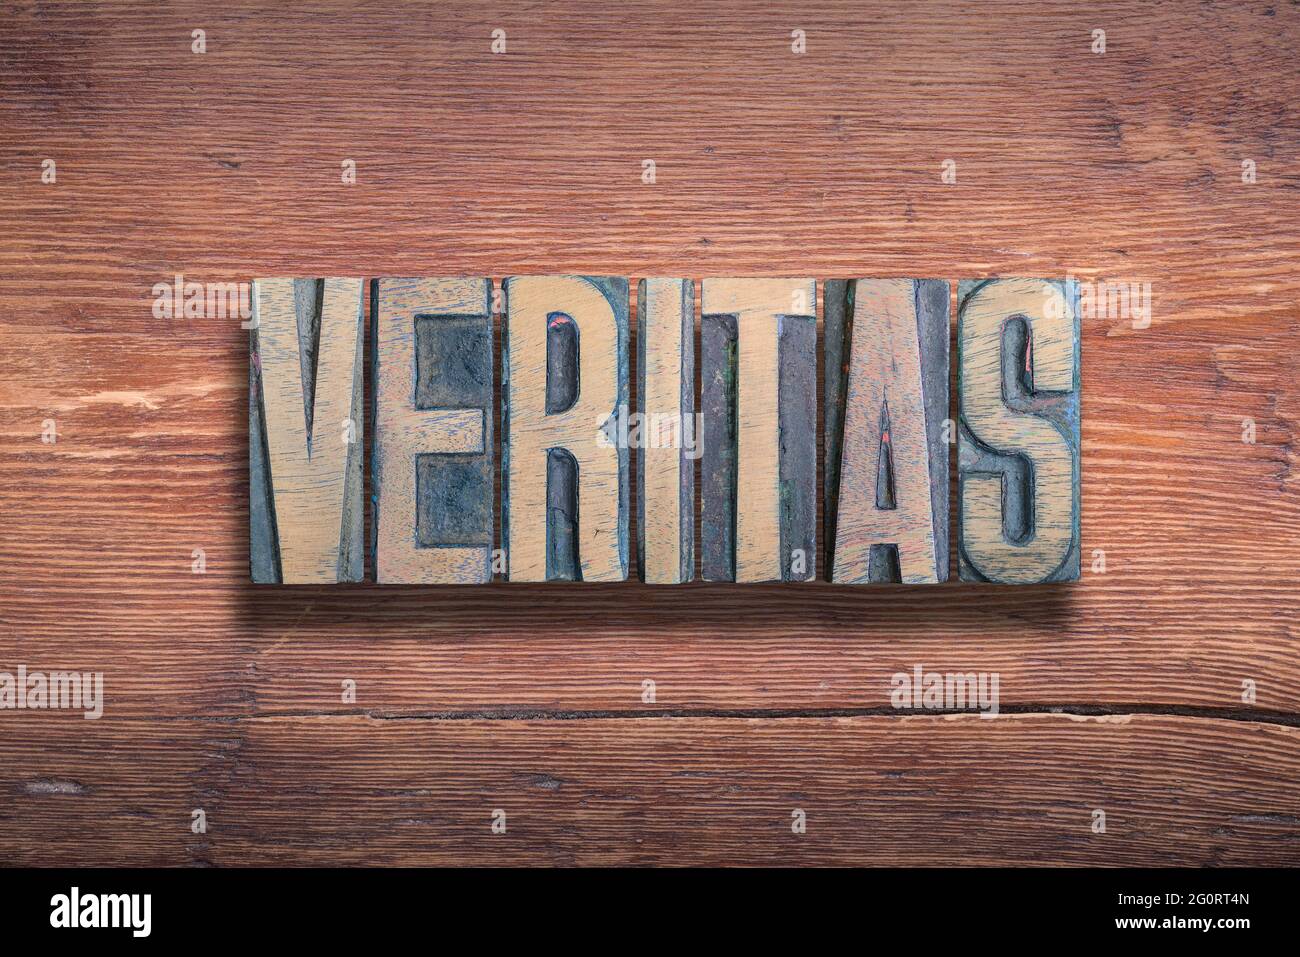 veritas ancient Latin word meaning - truth, combined on vintage varnished wooden surface Stock Photo